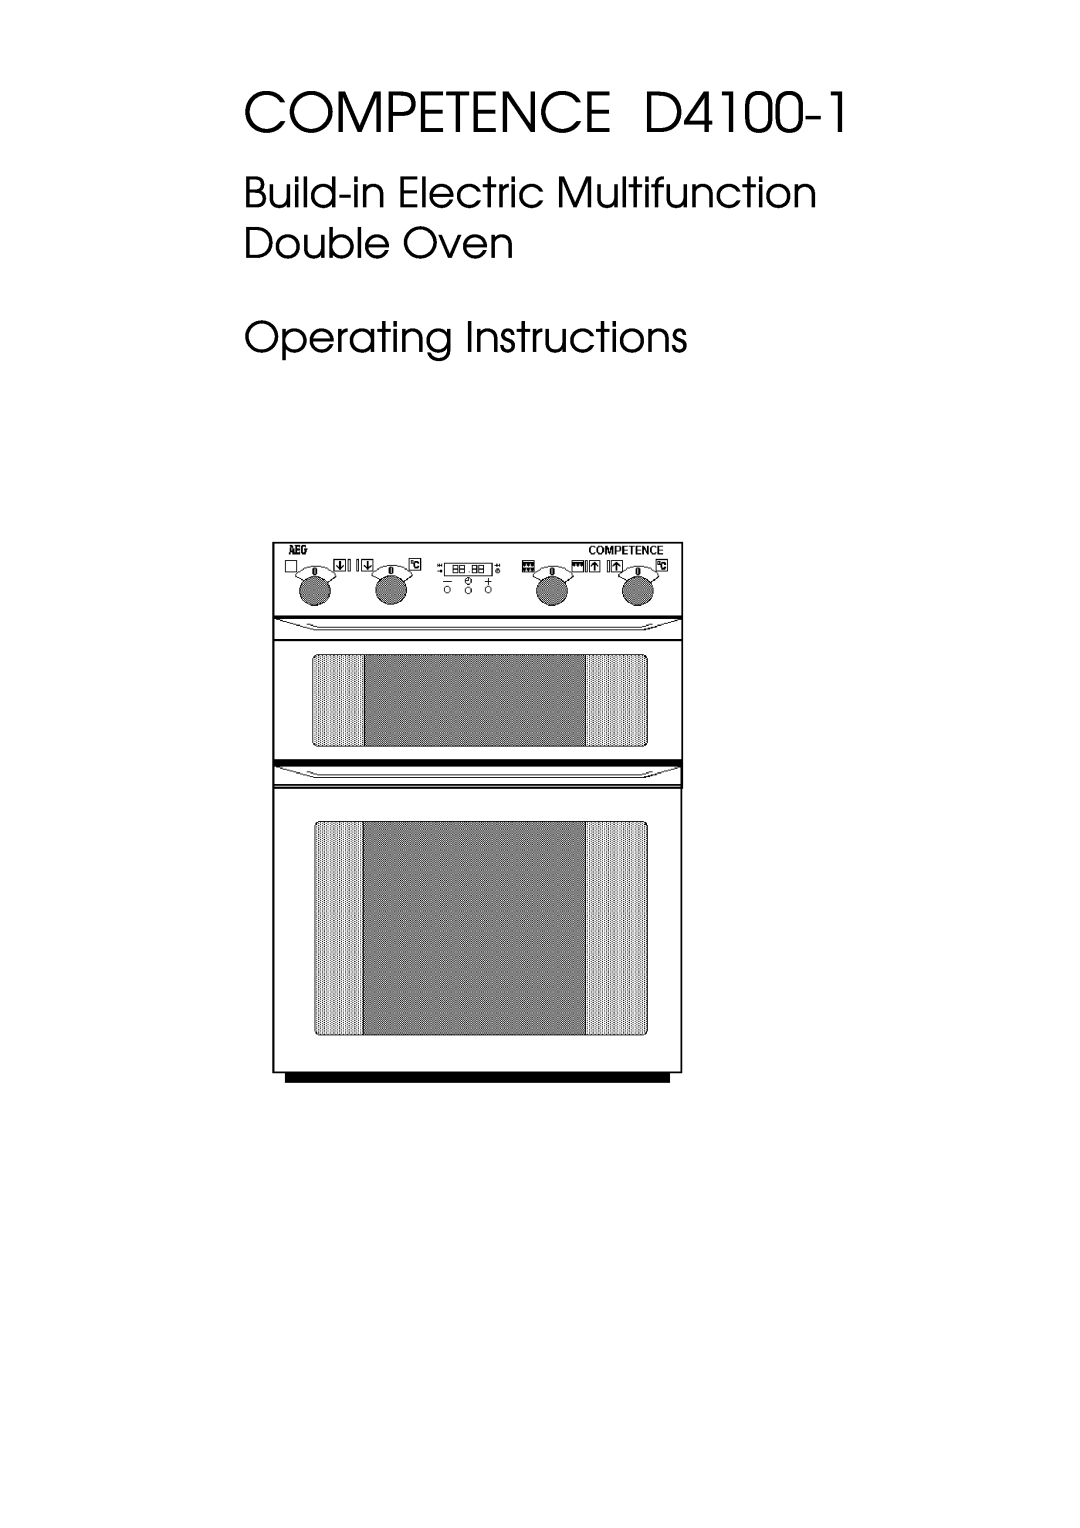 AEG manual COMPETENCE D4100-1, Build-inElectric Multifunction Double Oven, Operating Instructions 